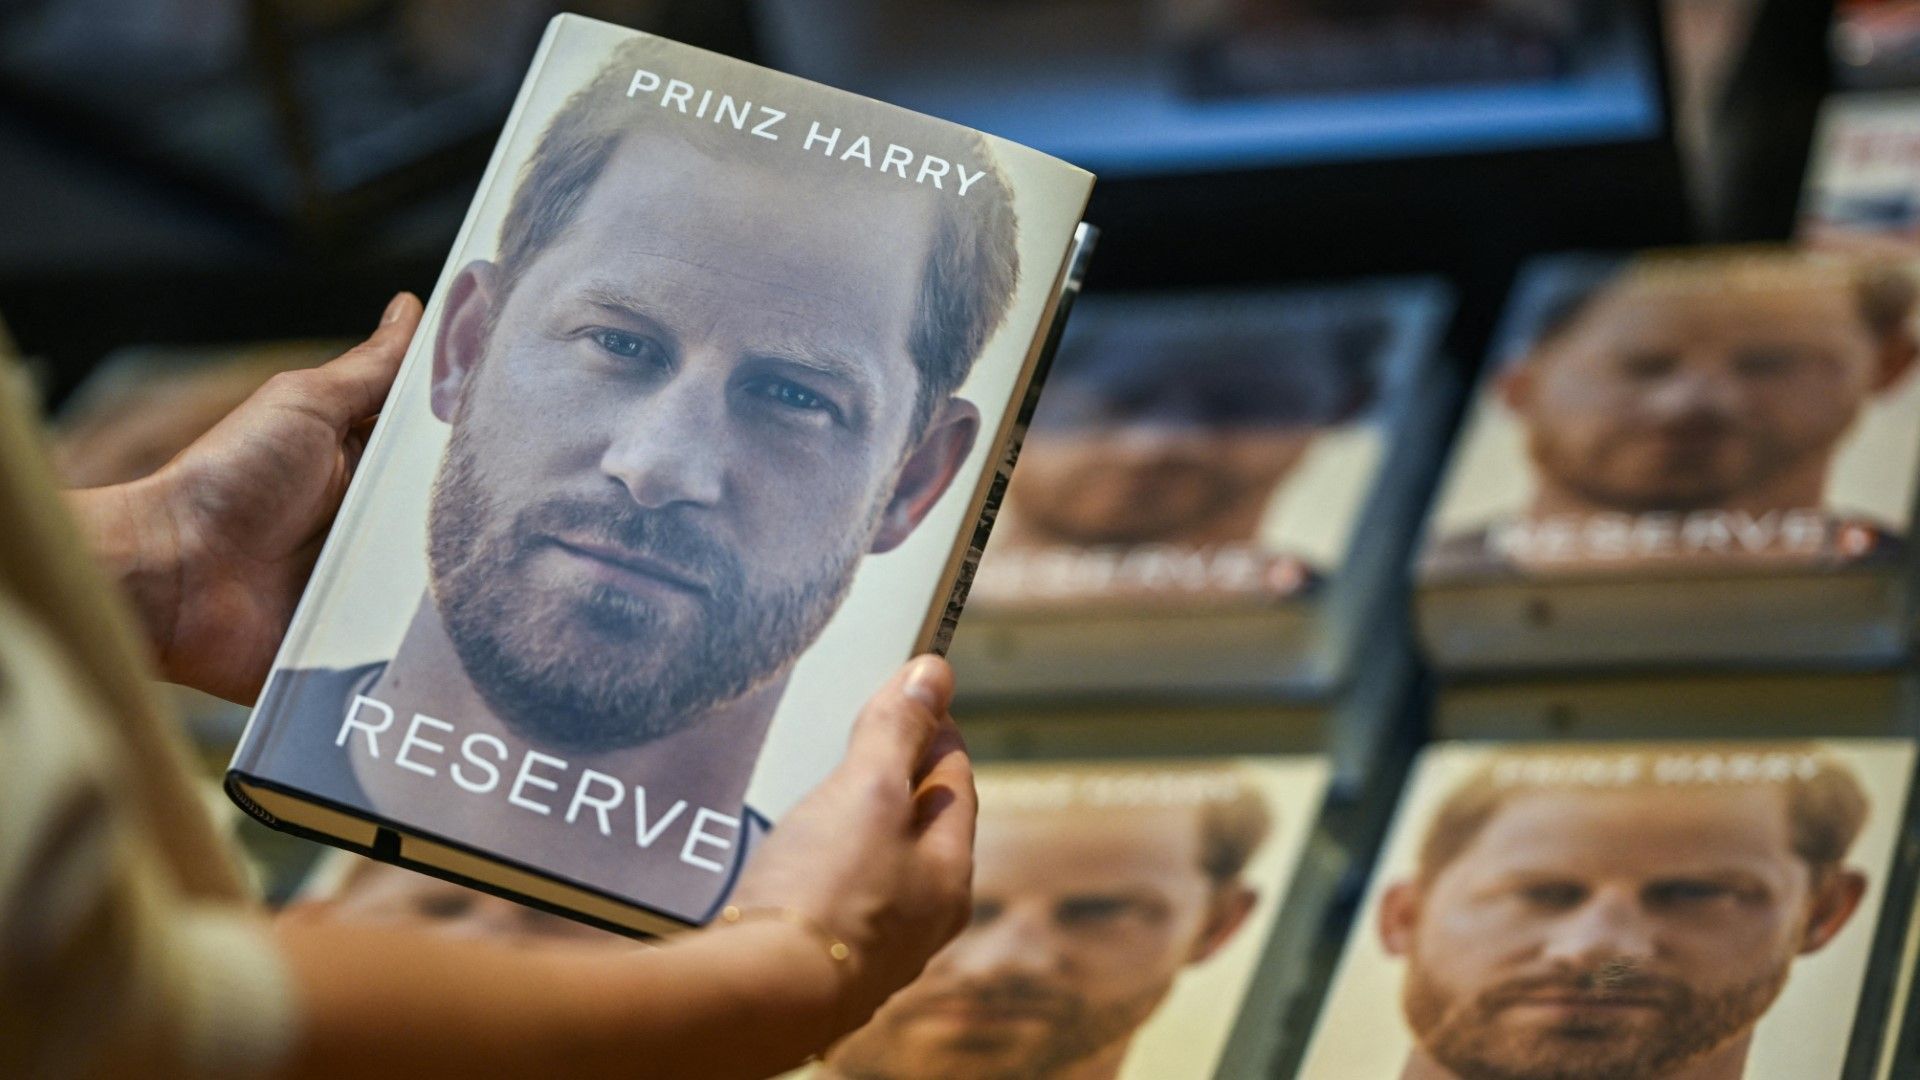 Prince Harry's Book Reserve: All Hot Air?